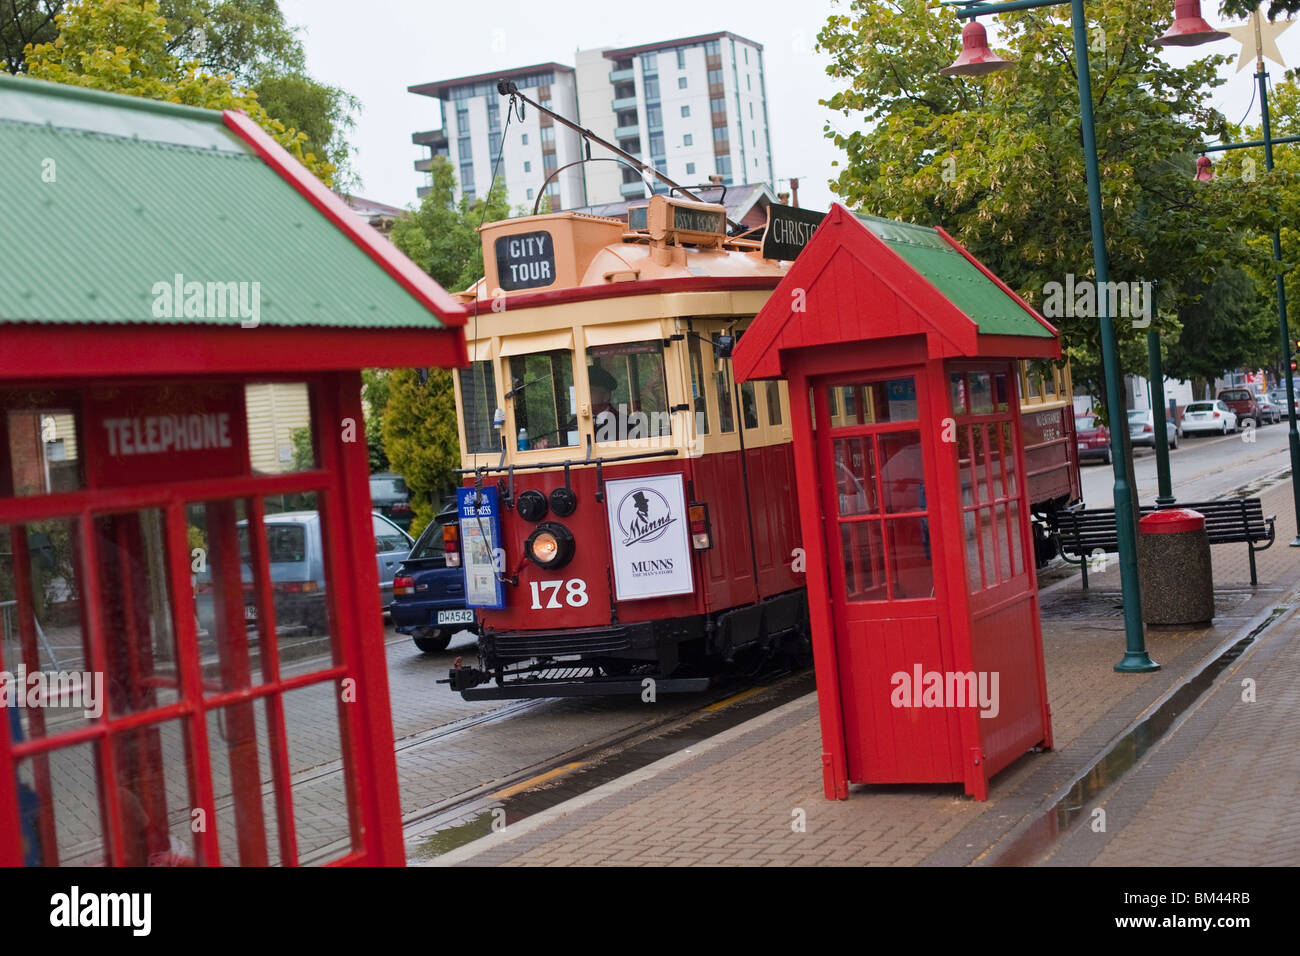 City tram and old fashioned telephone boxes. Christchurch, Canterbury, South Island, New Zealand Stock Photo